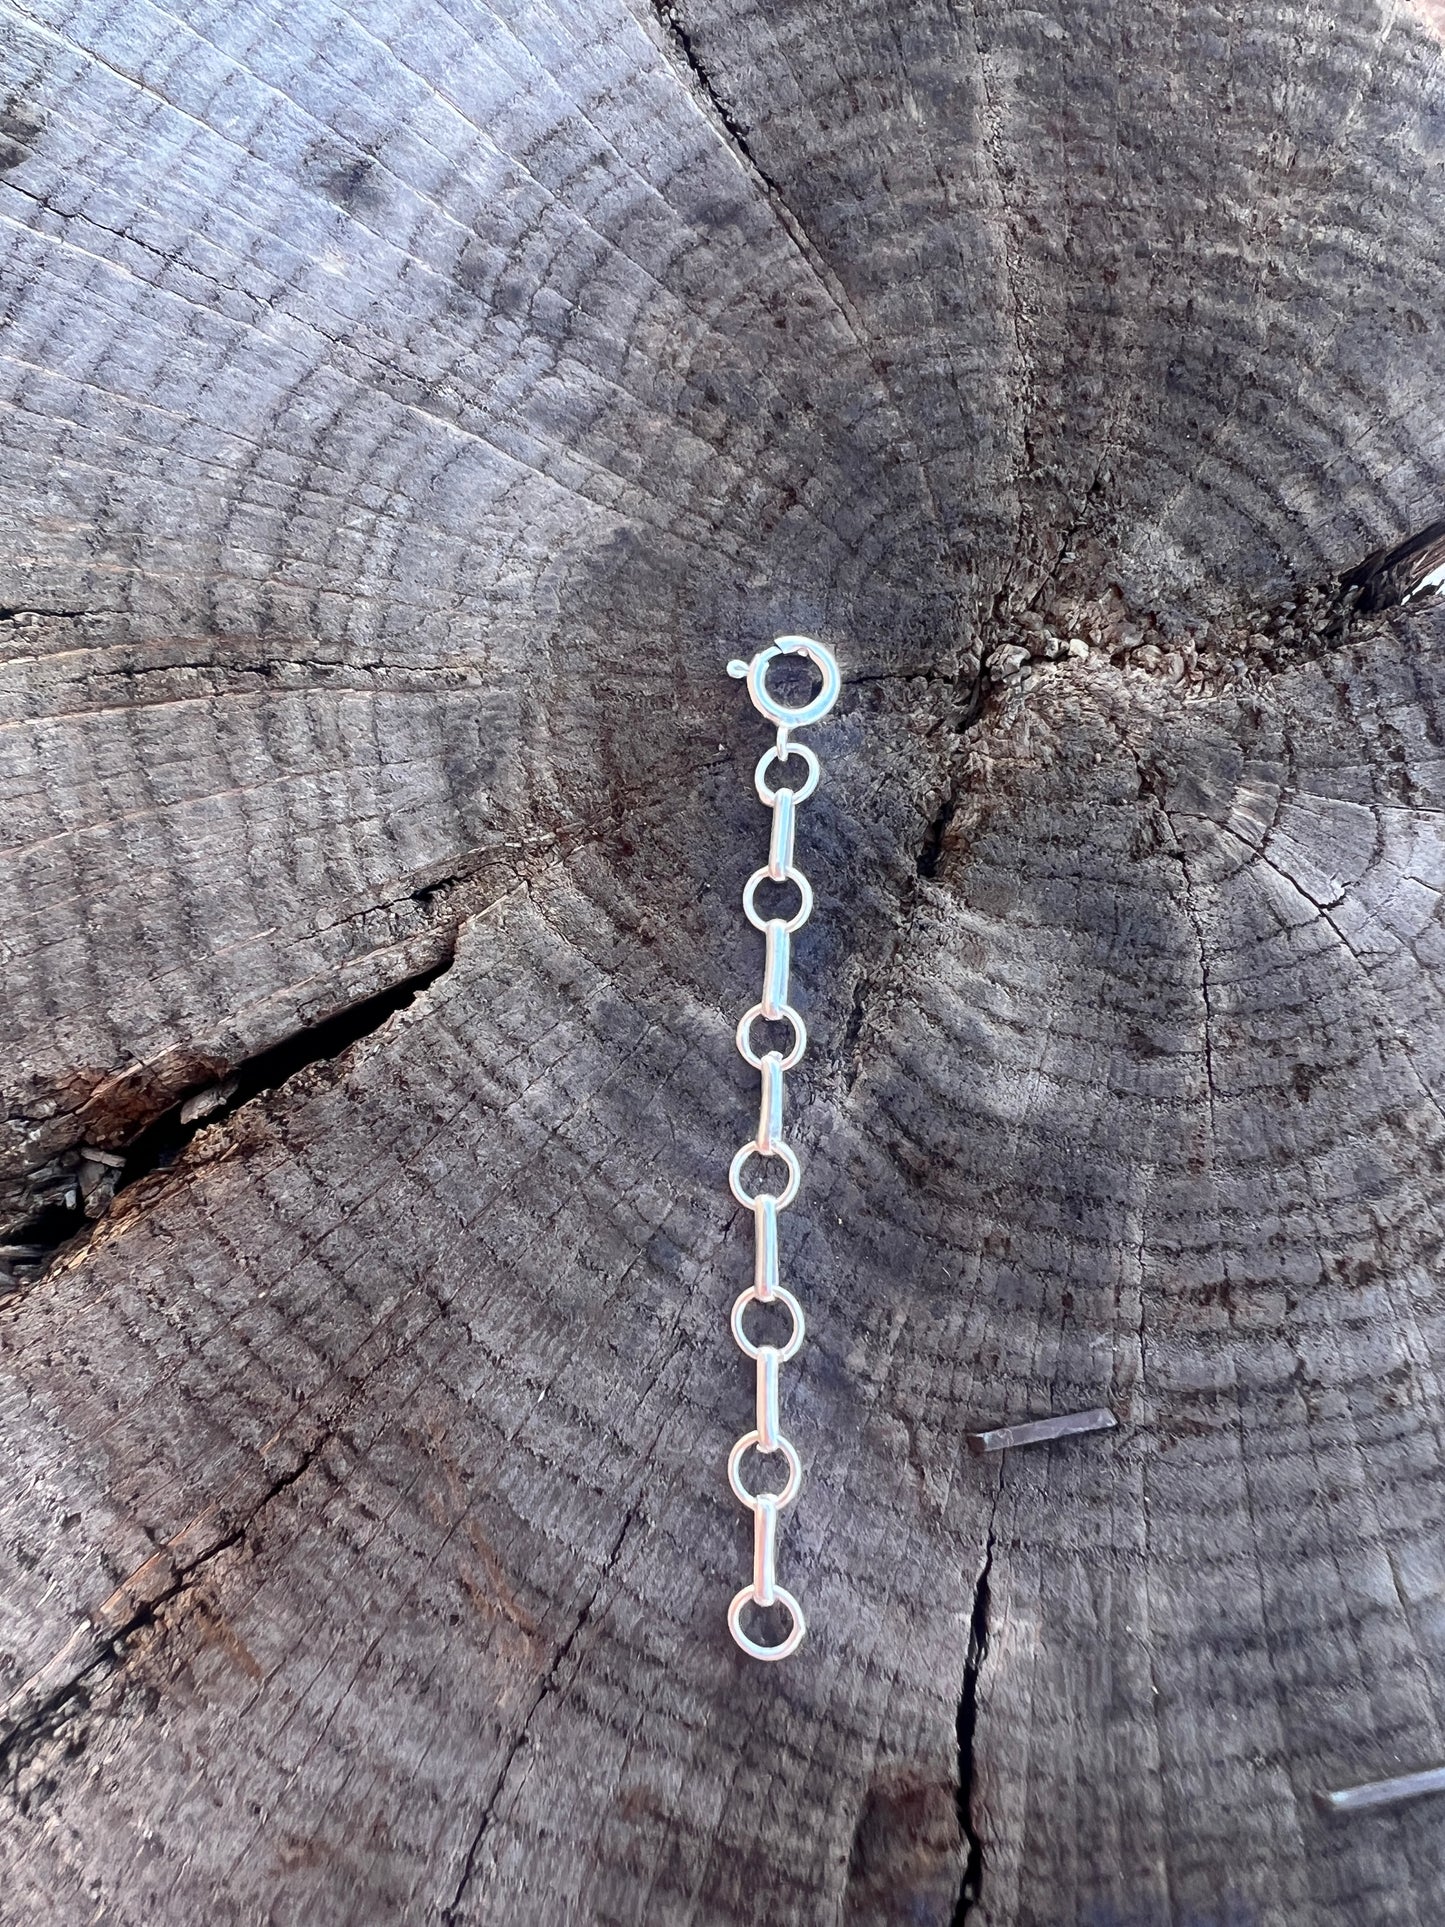 Sterling Silver Necklace Extender